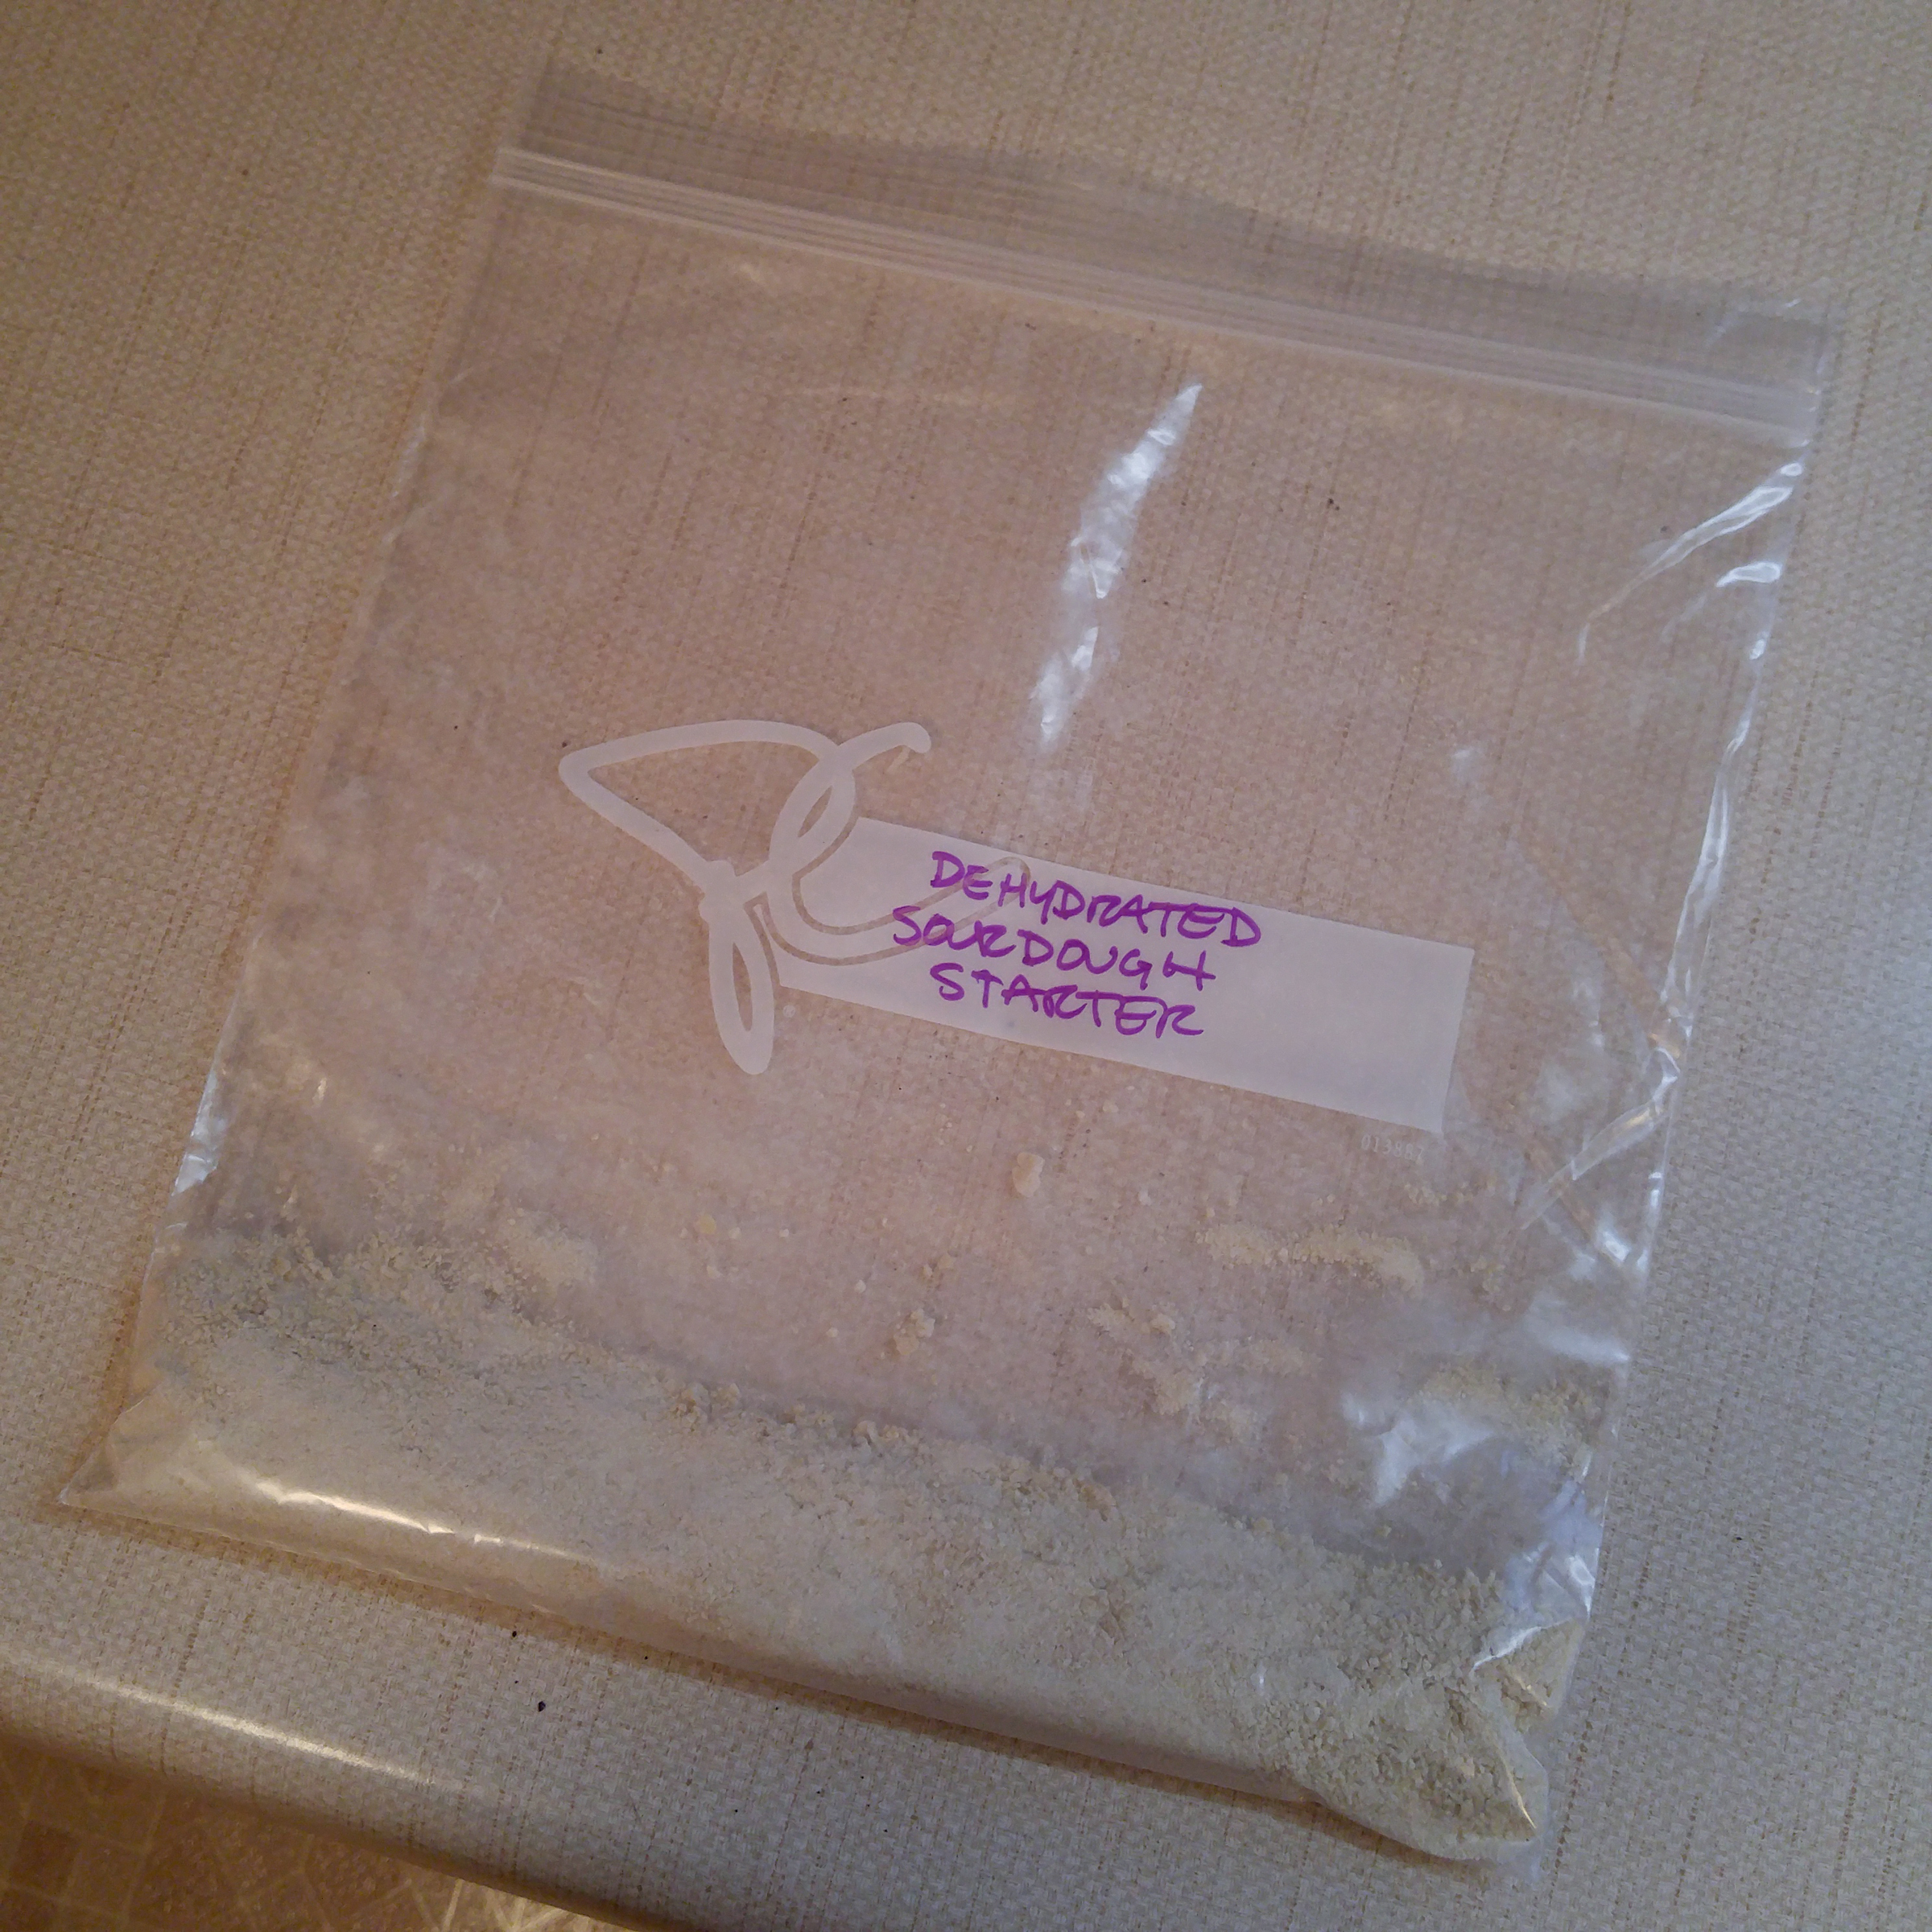 Dried SD in bag